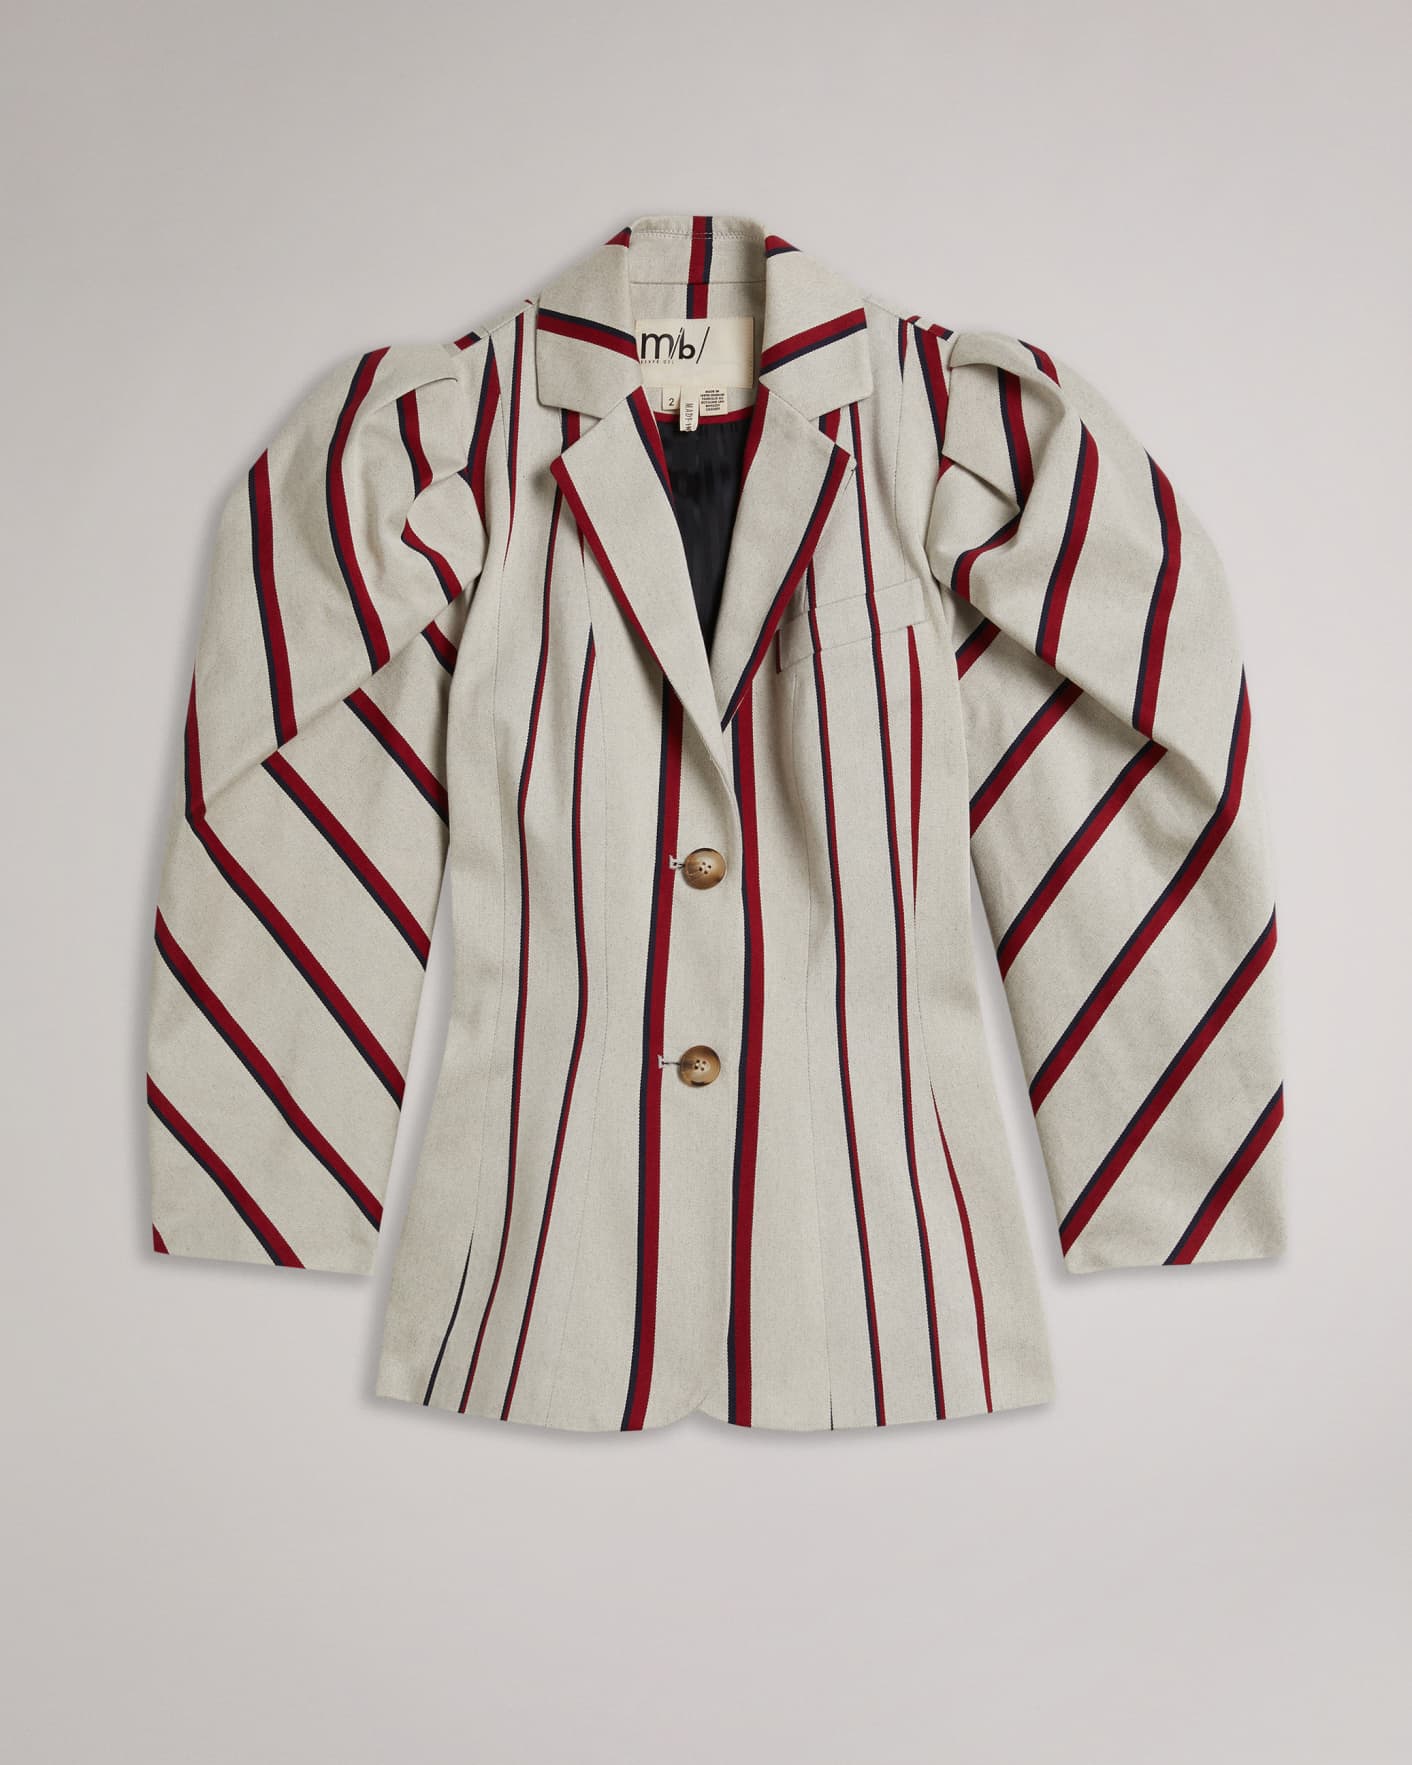 Natural MIB Striped Jacket Ted Baker